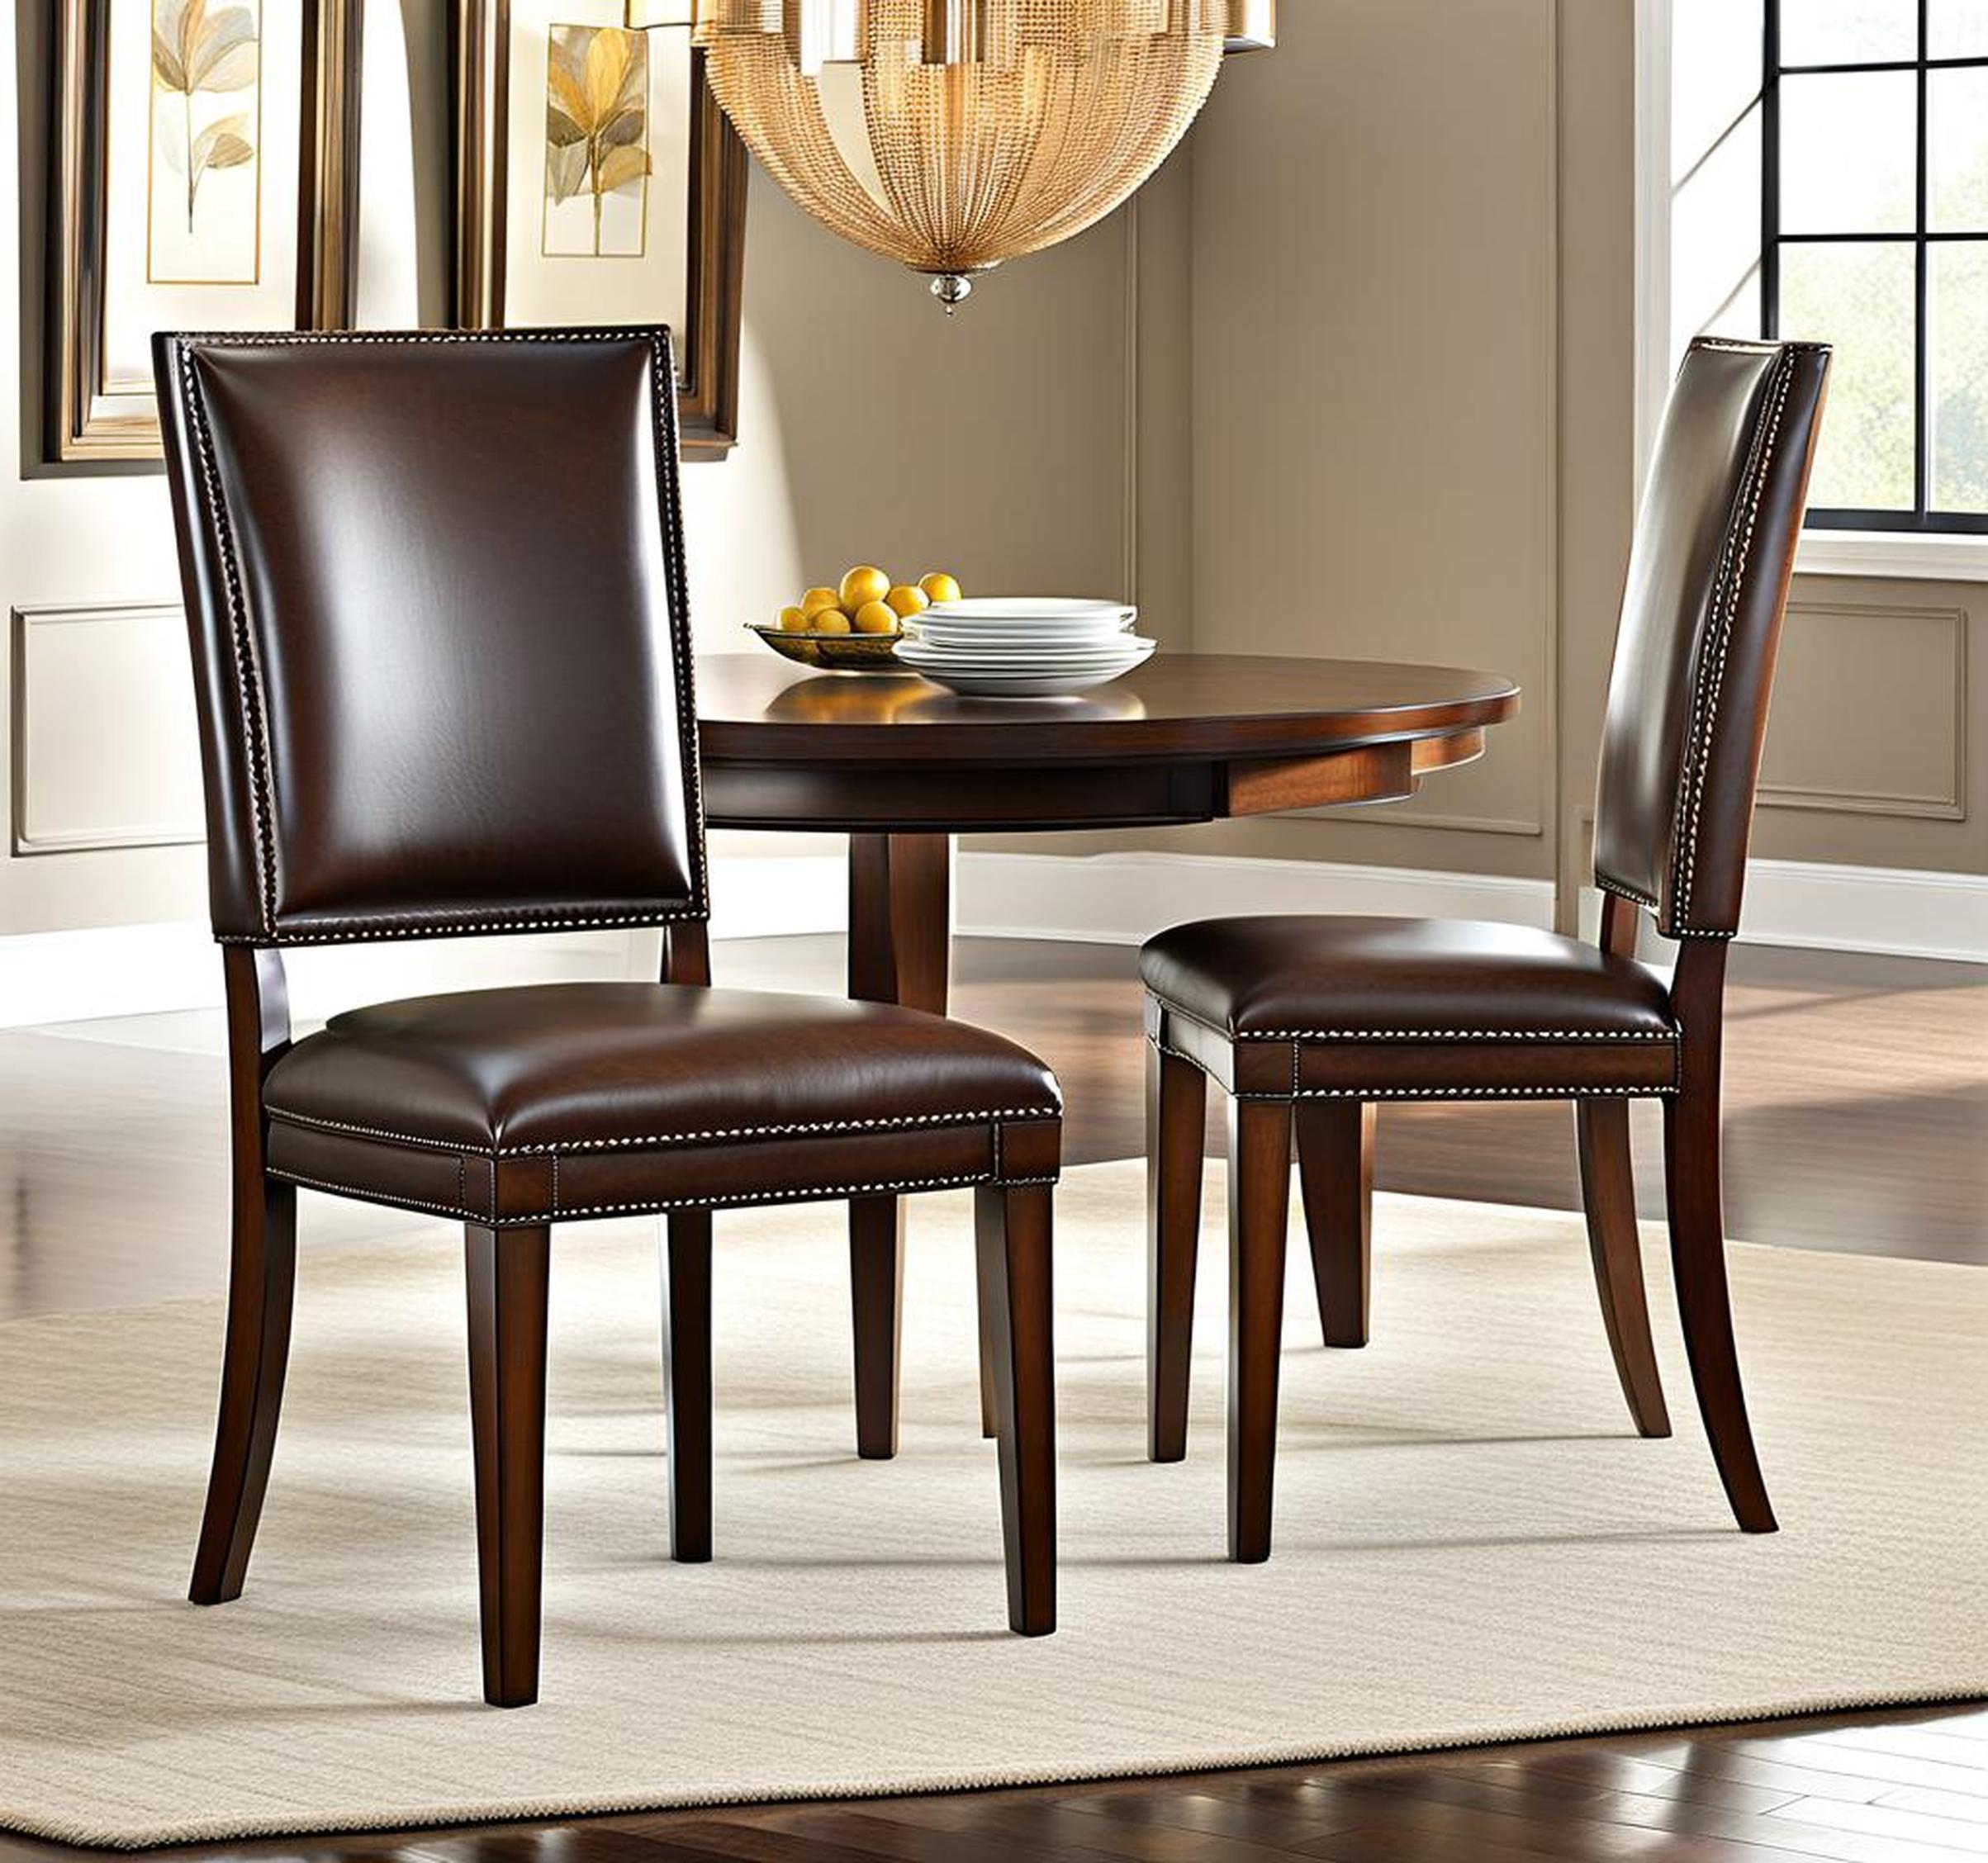 extra tall back dining chairs